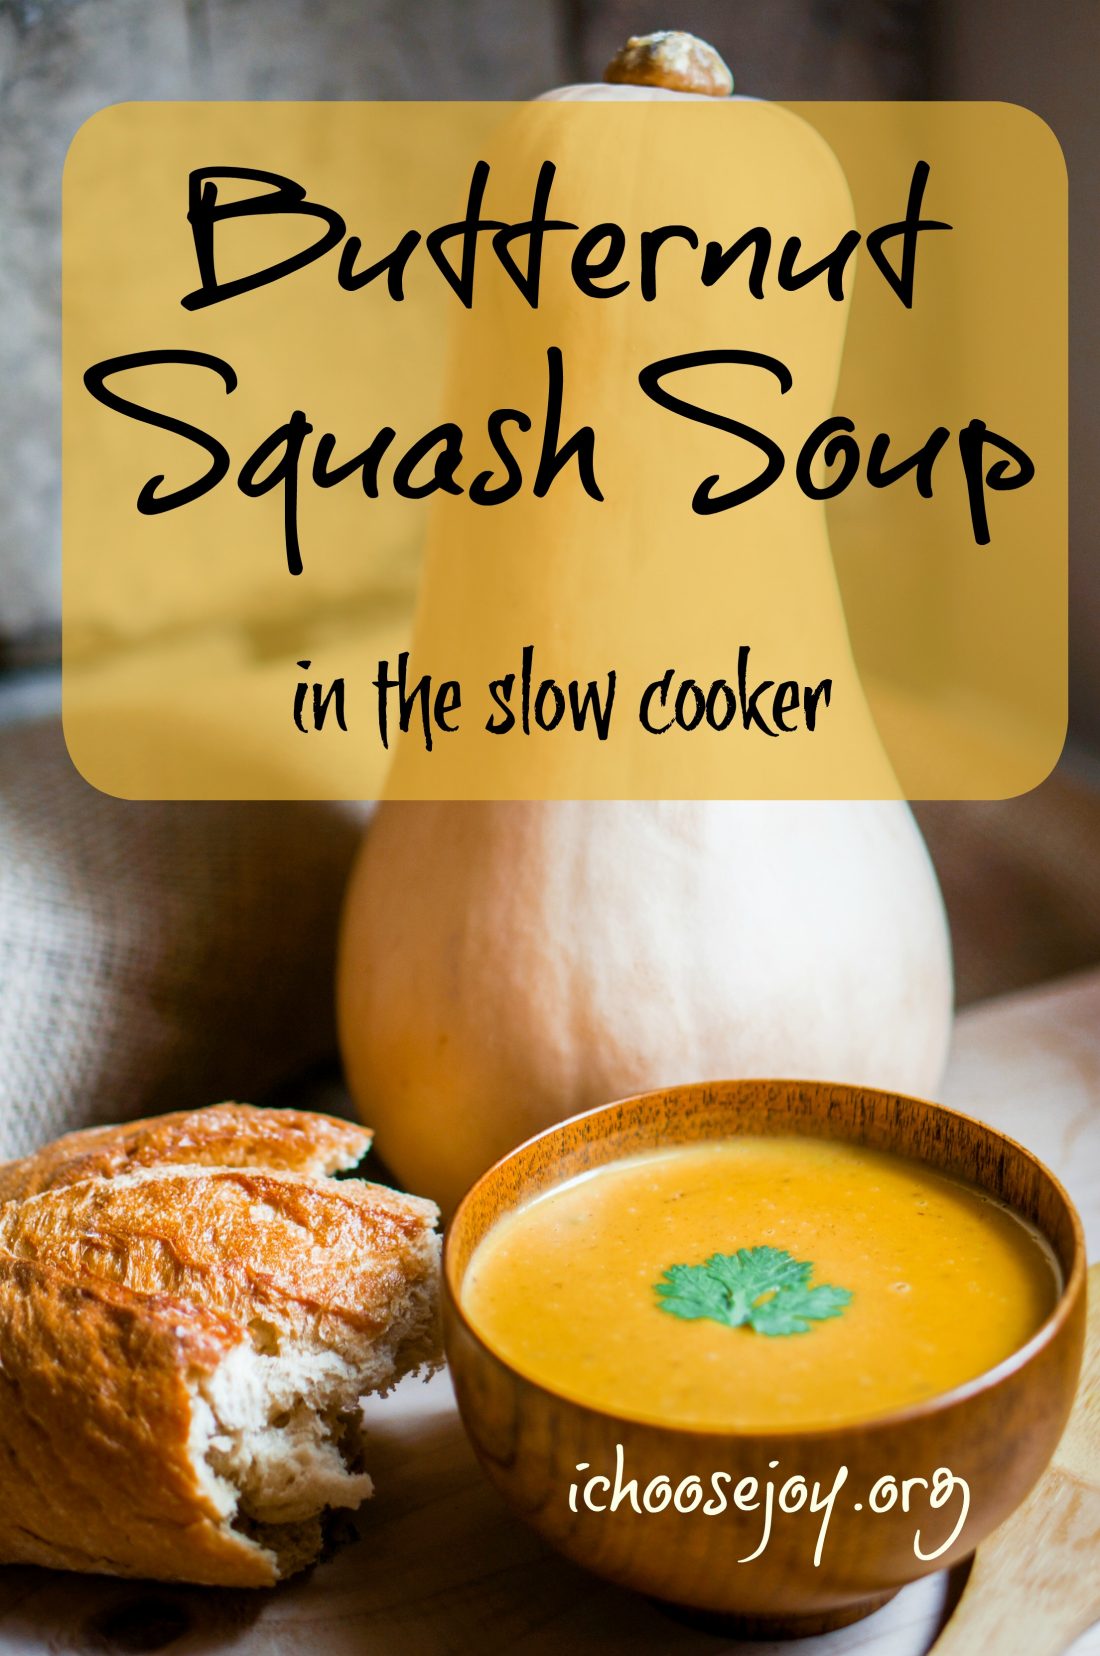 Butternut Squash Soup in the slow cooker